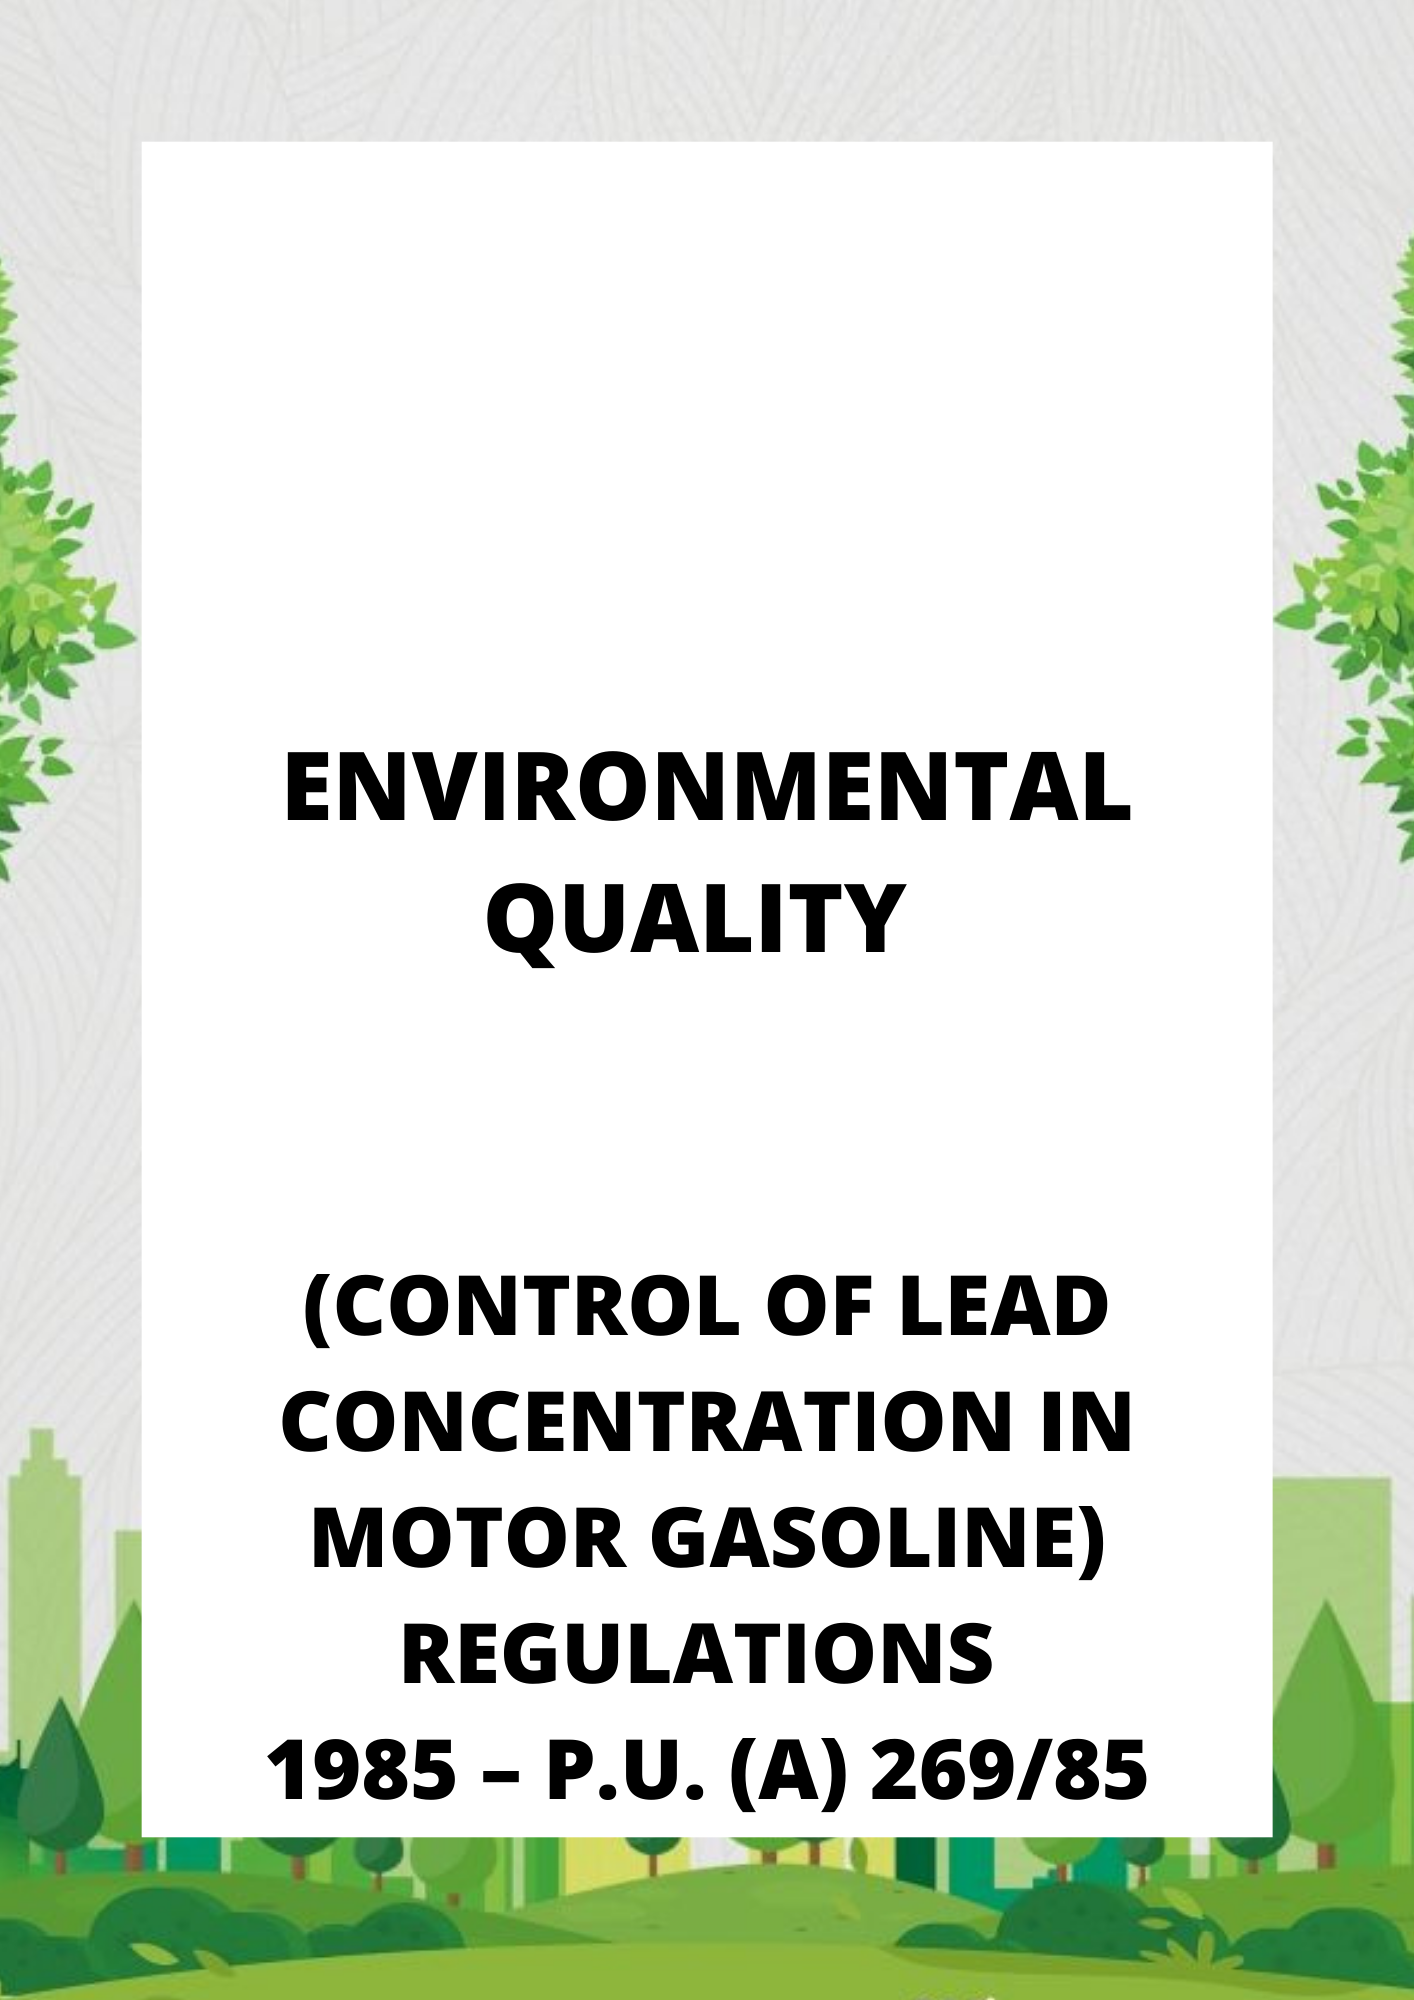 Environmental Quality (Control of Lead Concentration in Motor Gasoline) Regulations 1985 – P.U. (A) 26985